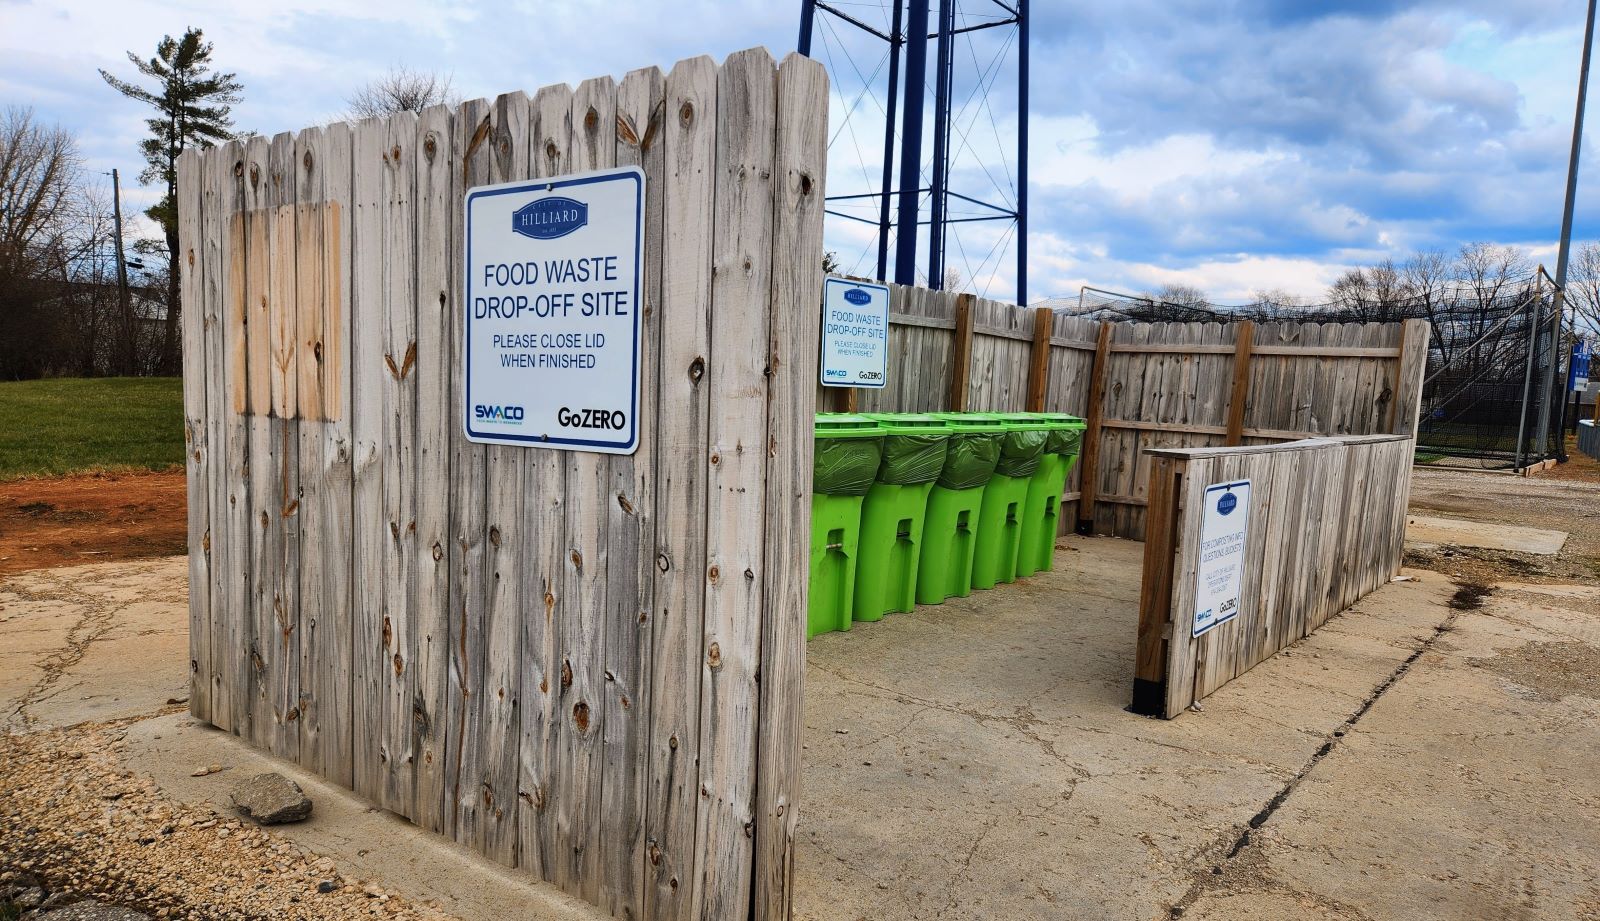 Compost collection bins from GoZero at the Hilliard Municipal Center Food Waste Drop-Off Site